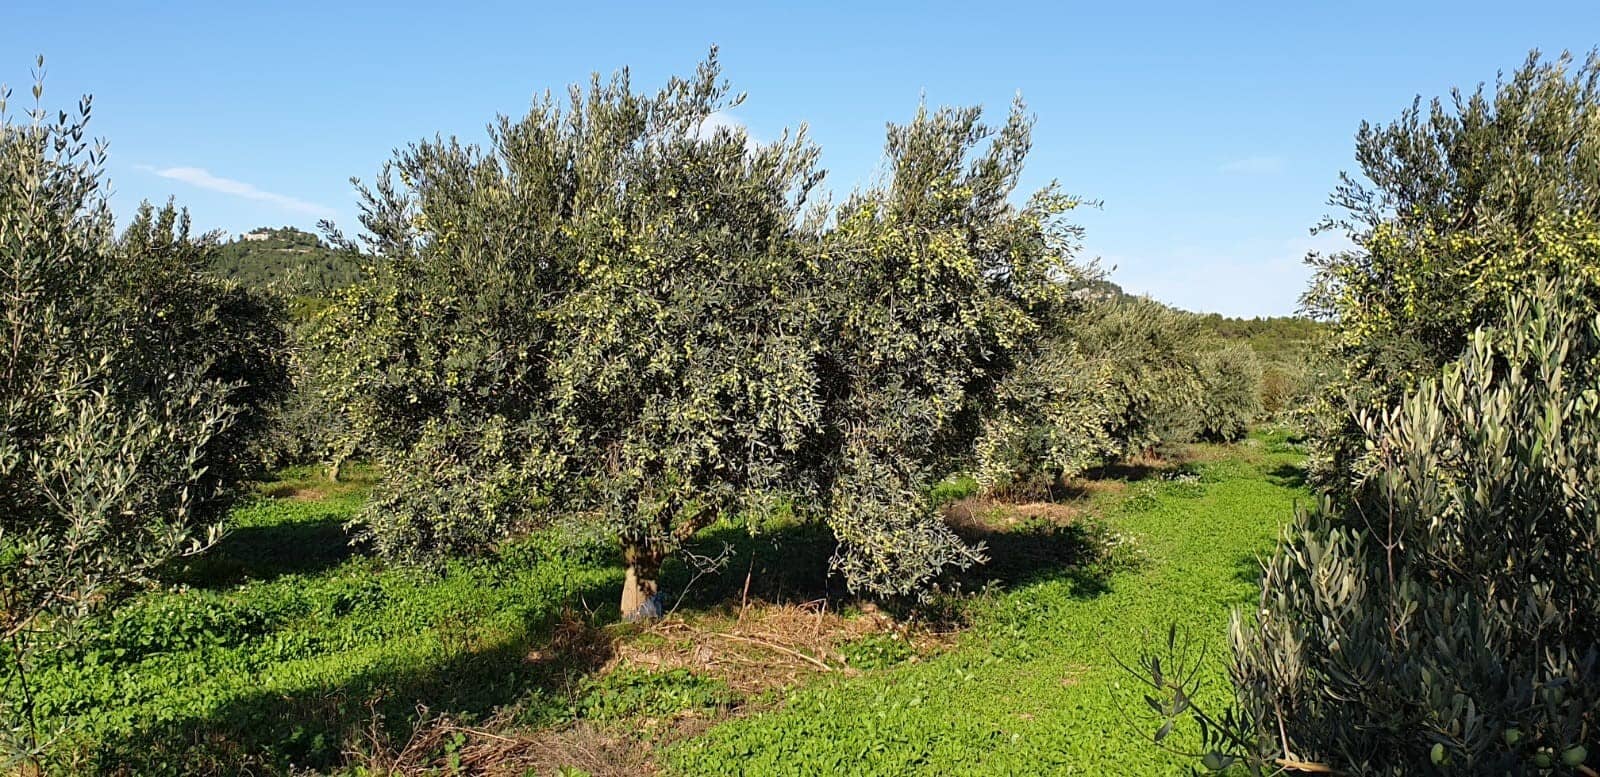 europe-profiles-the-best-olive-oils-production-a-family-tradition-takes-root-at-moulin-de-la-coquille-olive-oil-times